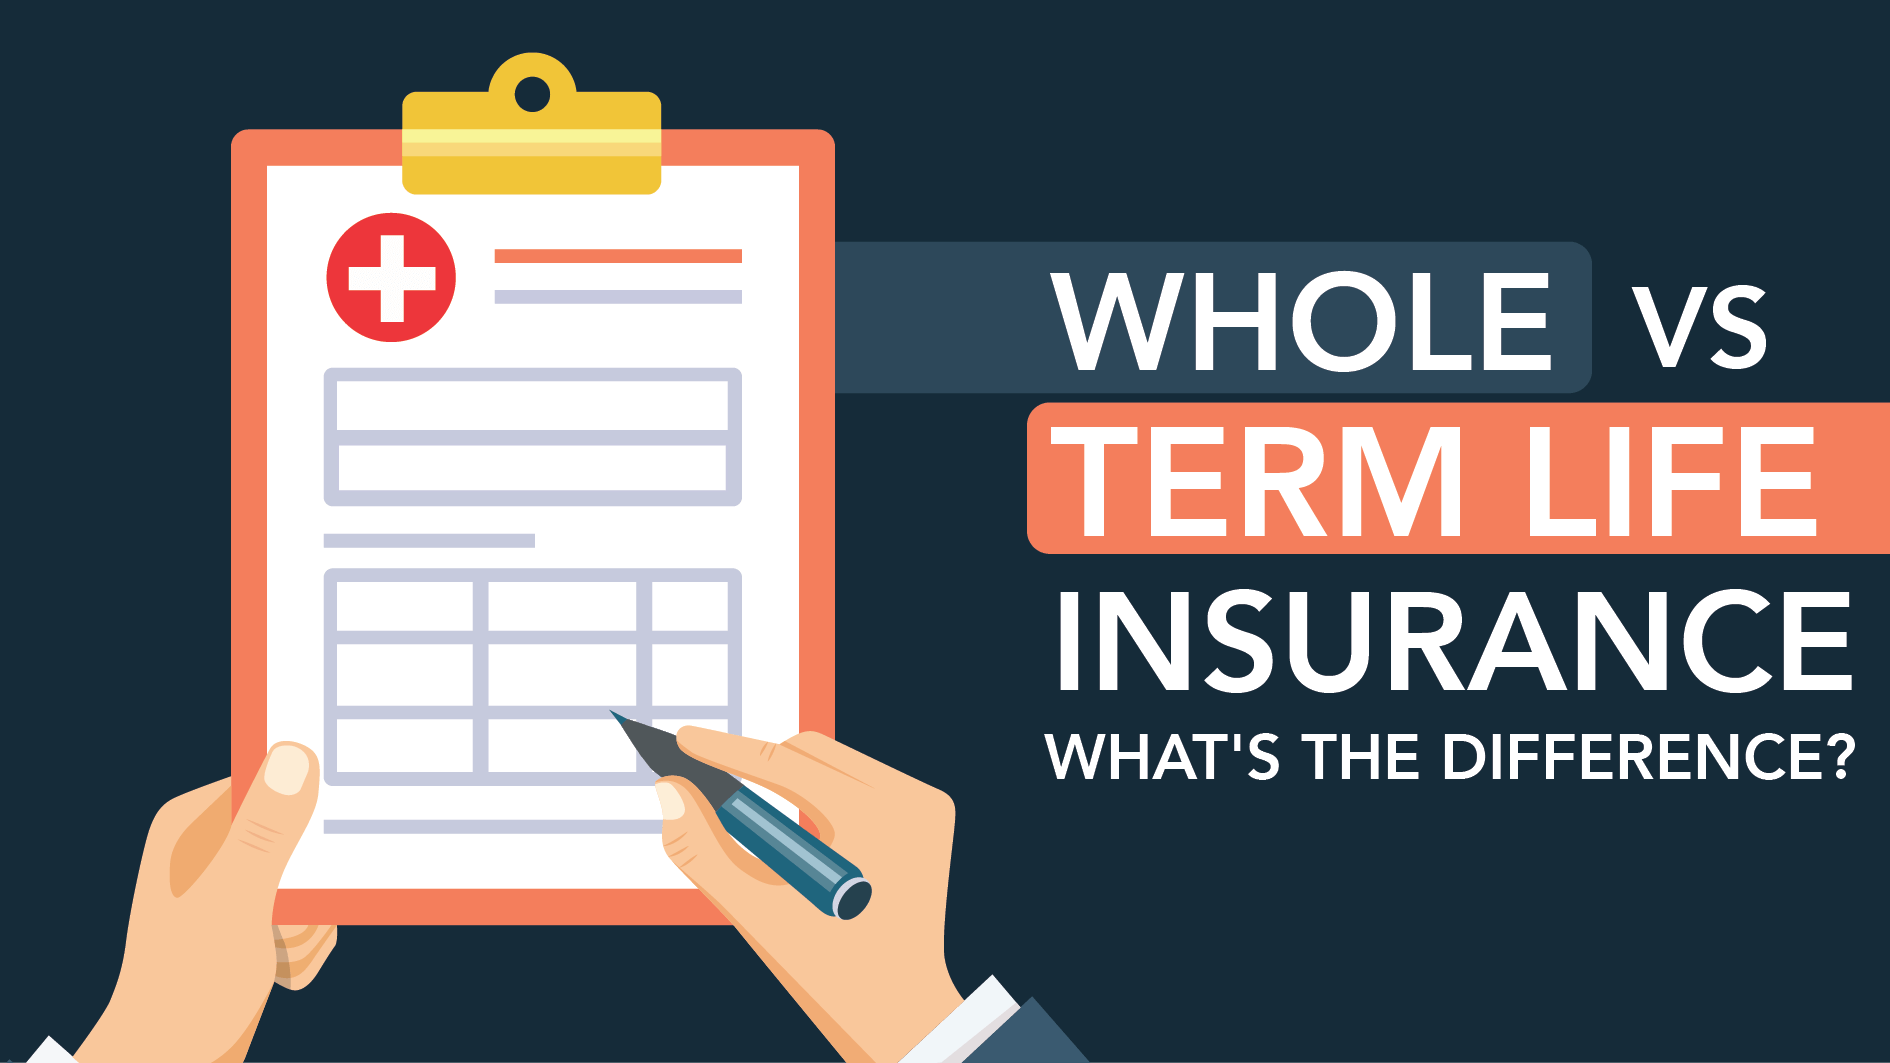 Whole vs. Term Life Insurance: What’s the Difference?